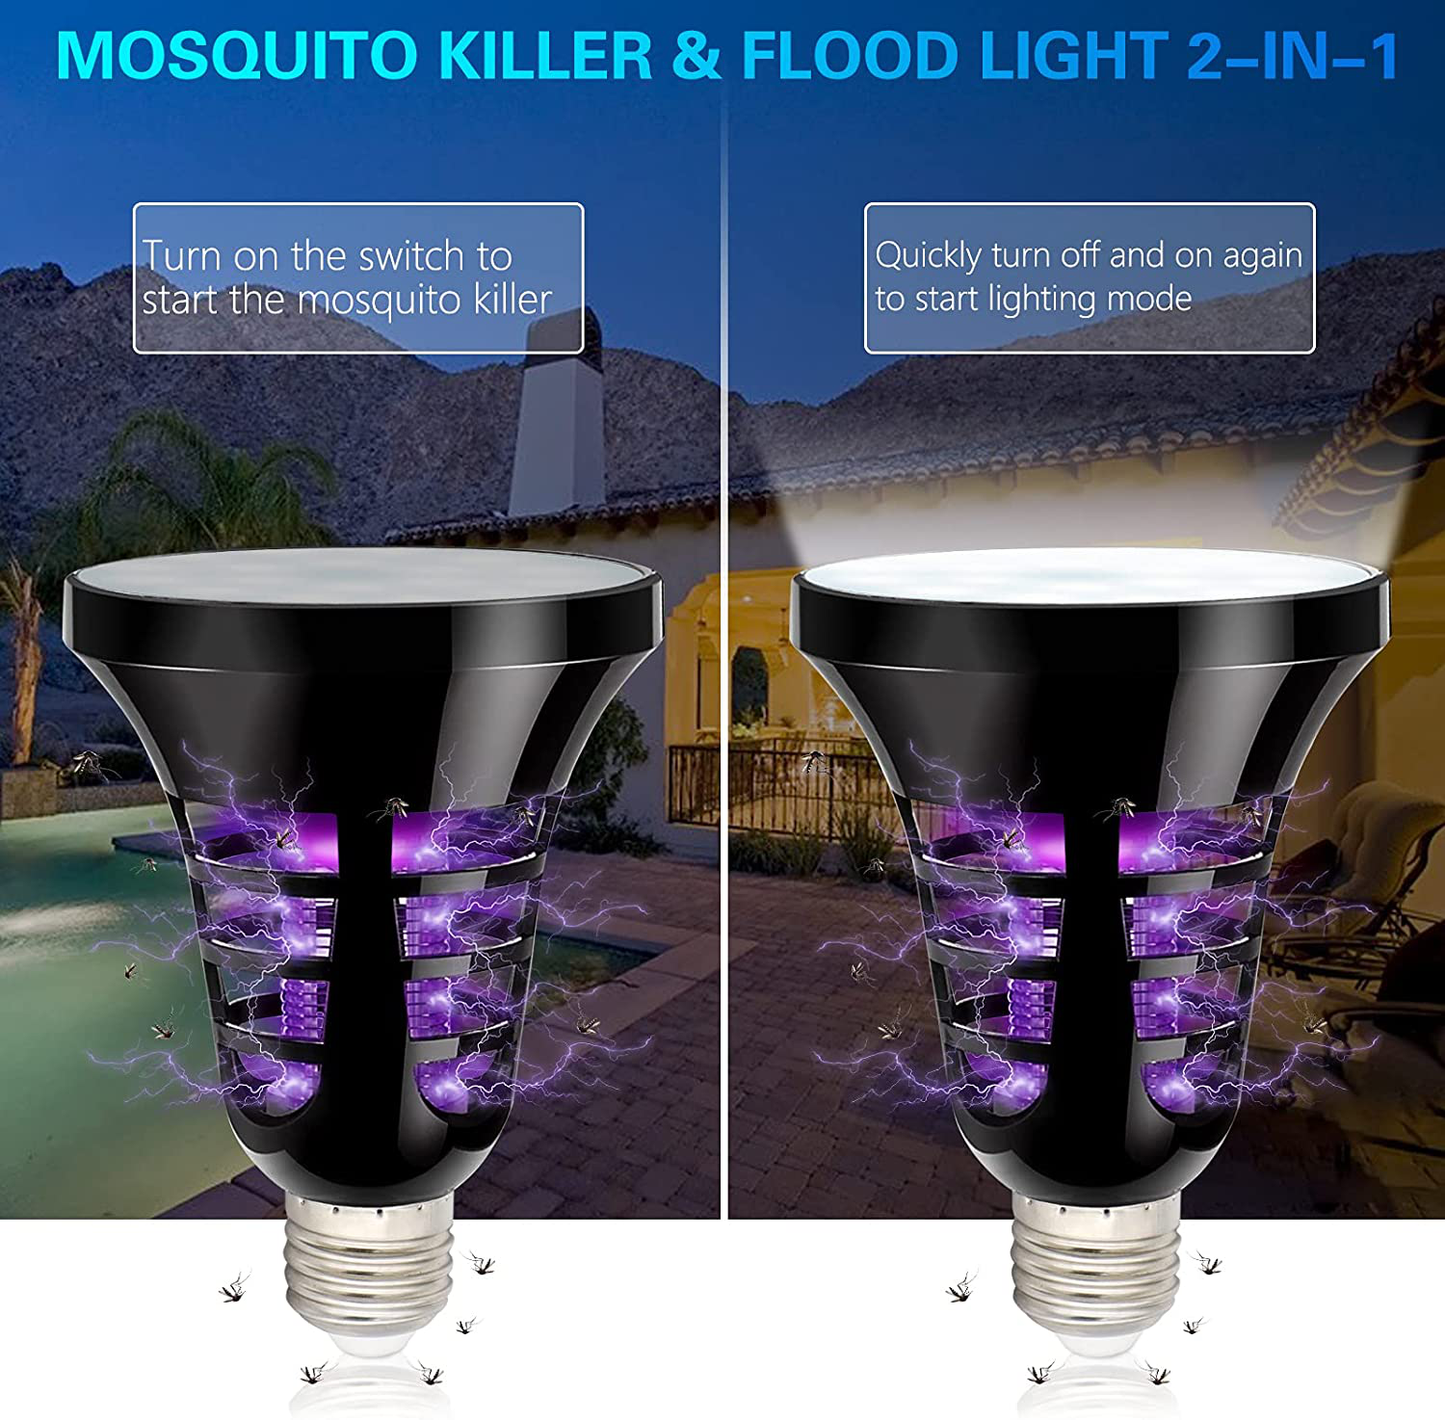 COZYLIFE 2-in-1 Bug Zapper Light Bulb, Outdoor Camping Lamp, USB Powered Tent Lantern with Hanging Hook, UV LED Insect Mosquito Fly Trap Killer Bulb Portable, Comes with Cleaning Brush and USB Cable